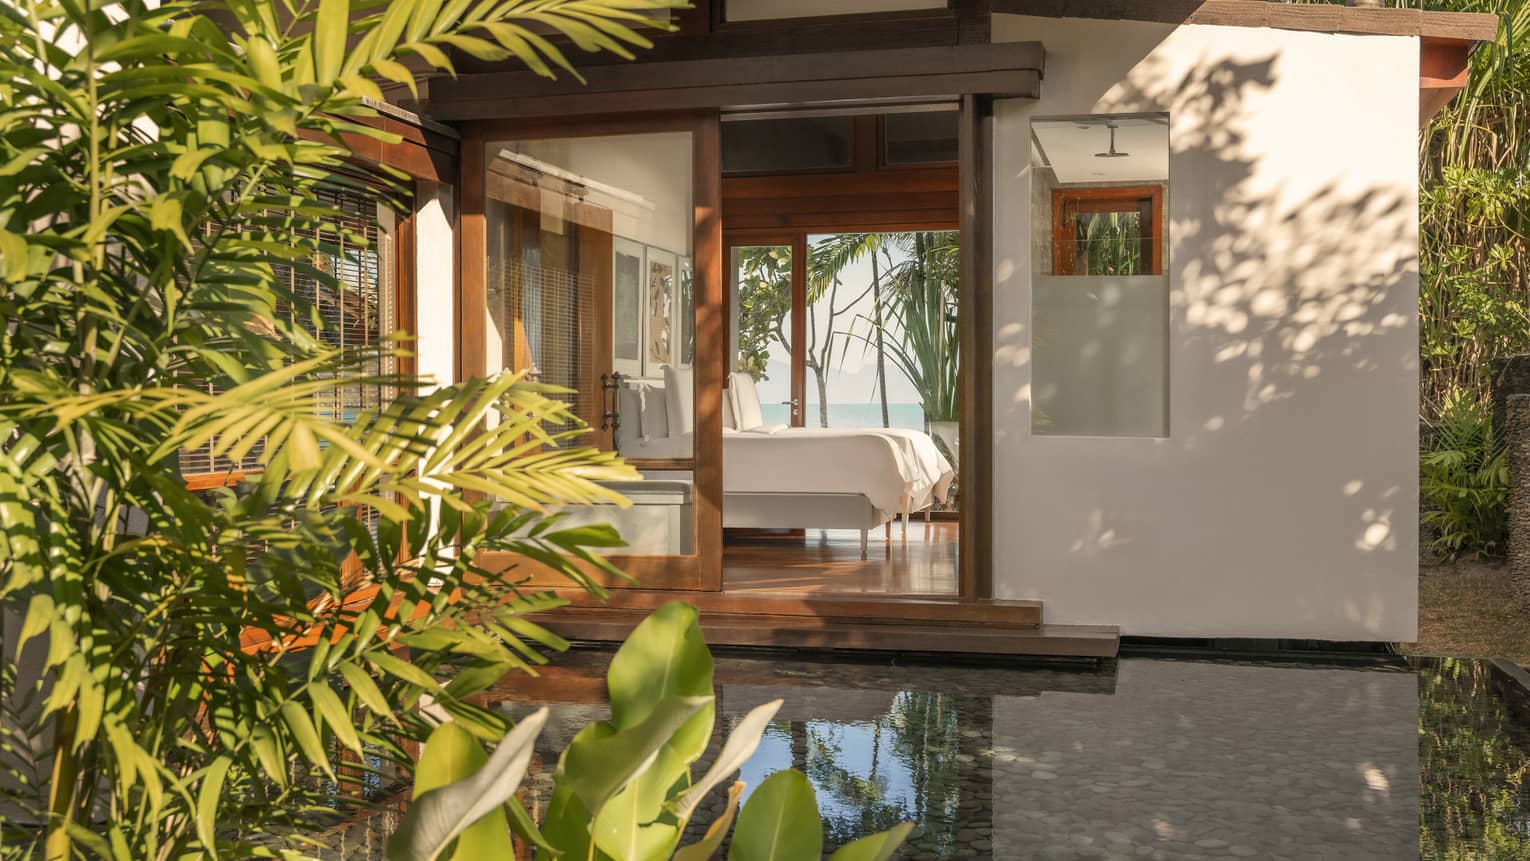 View of a Langkawi resort bedroom from the private garden terrace